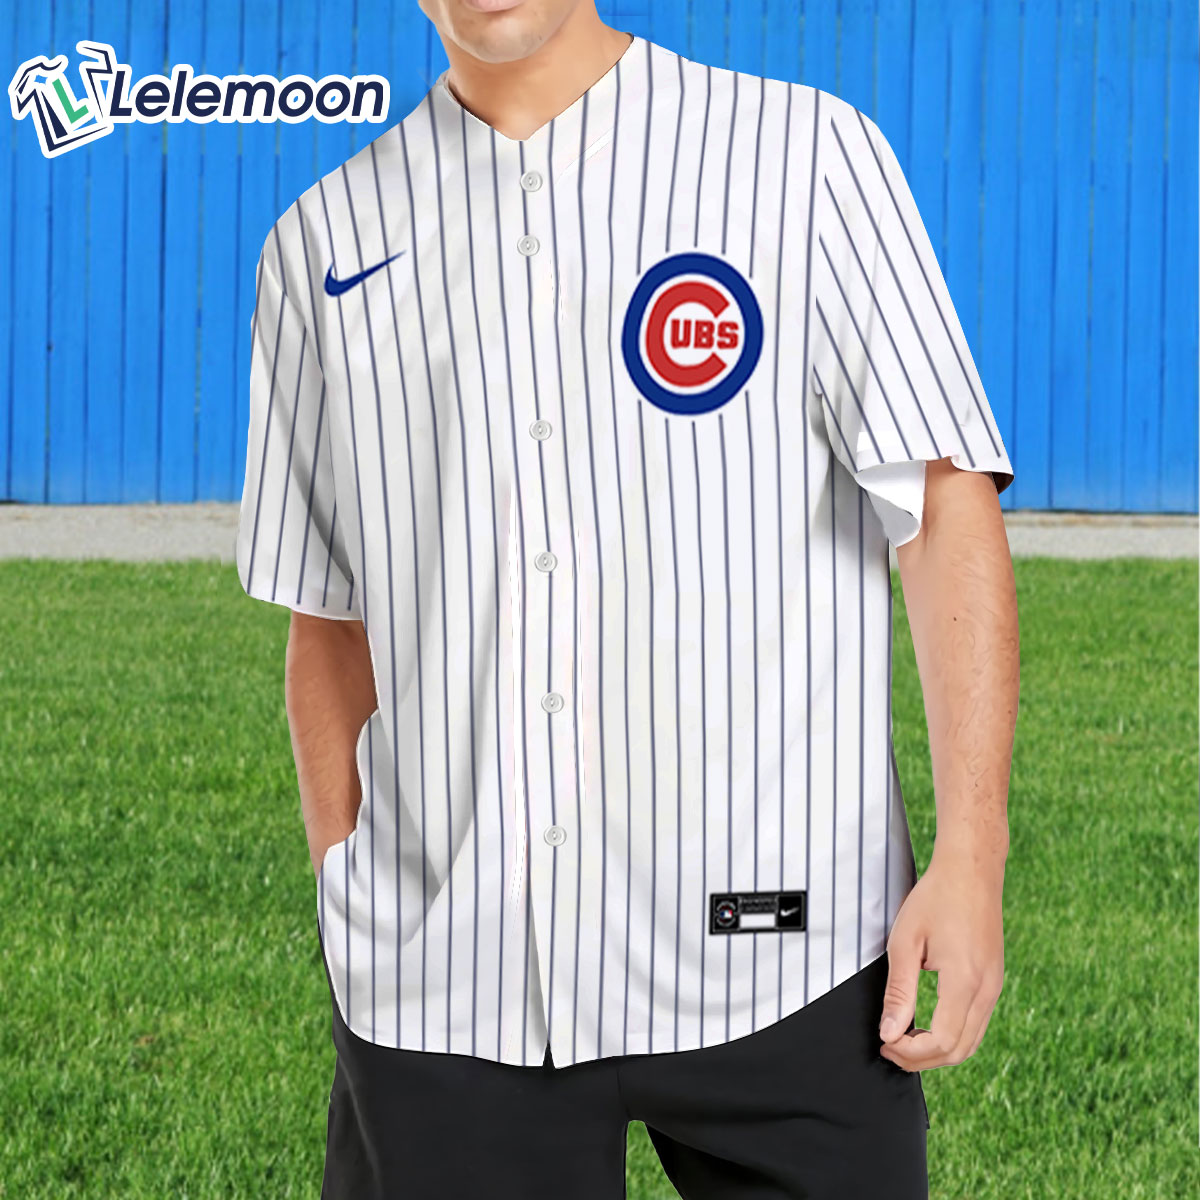 Chicago Cubs Personalized Jerseys Customized Shirts with Any Name